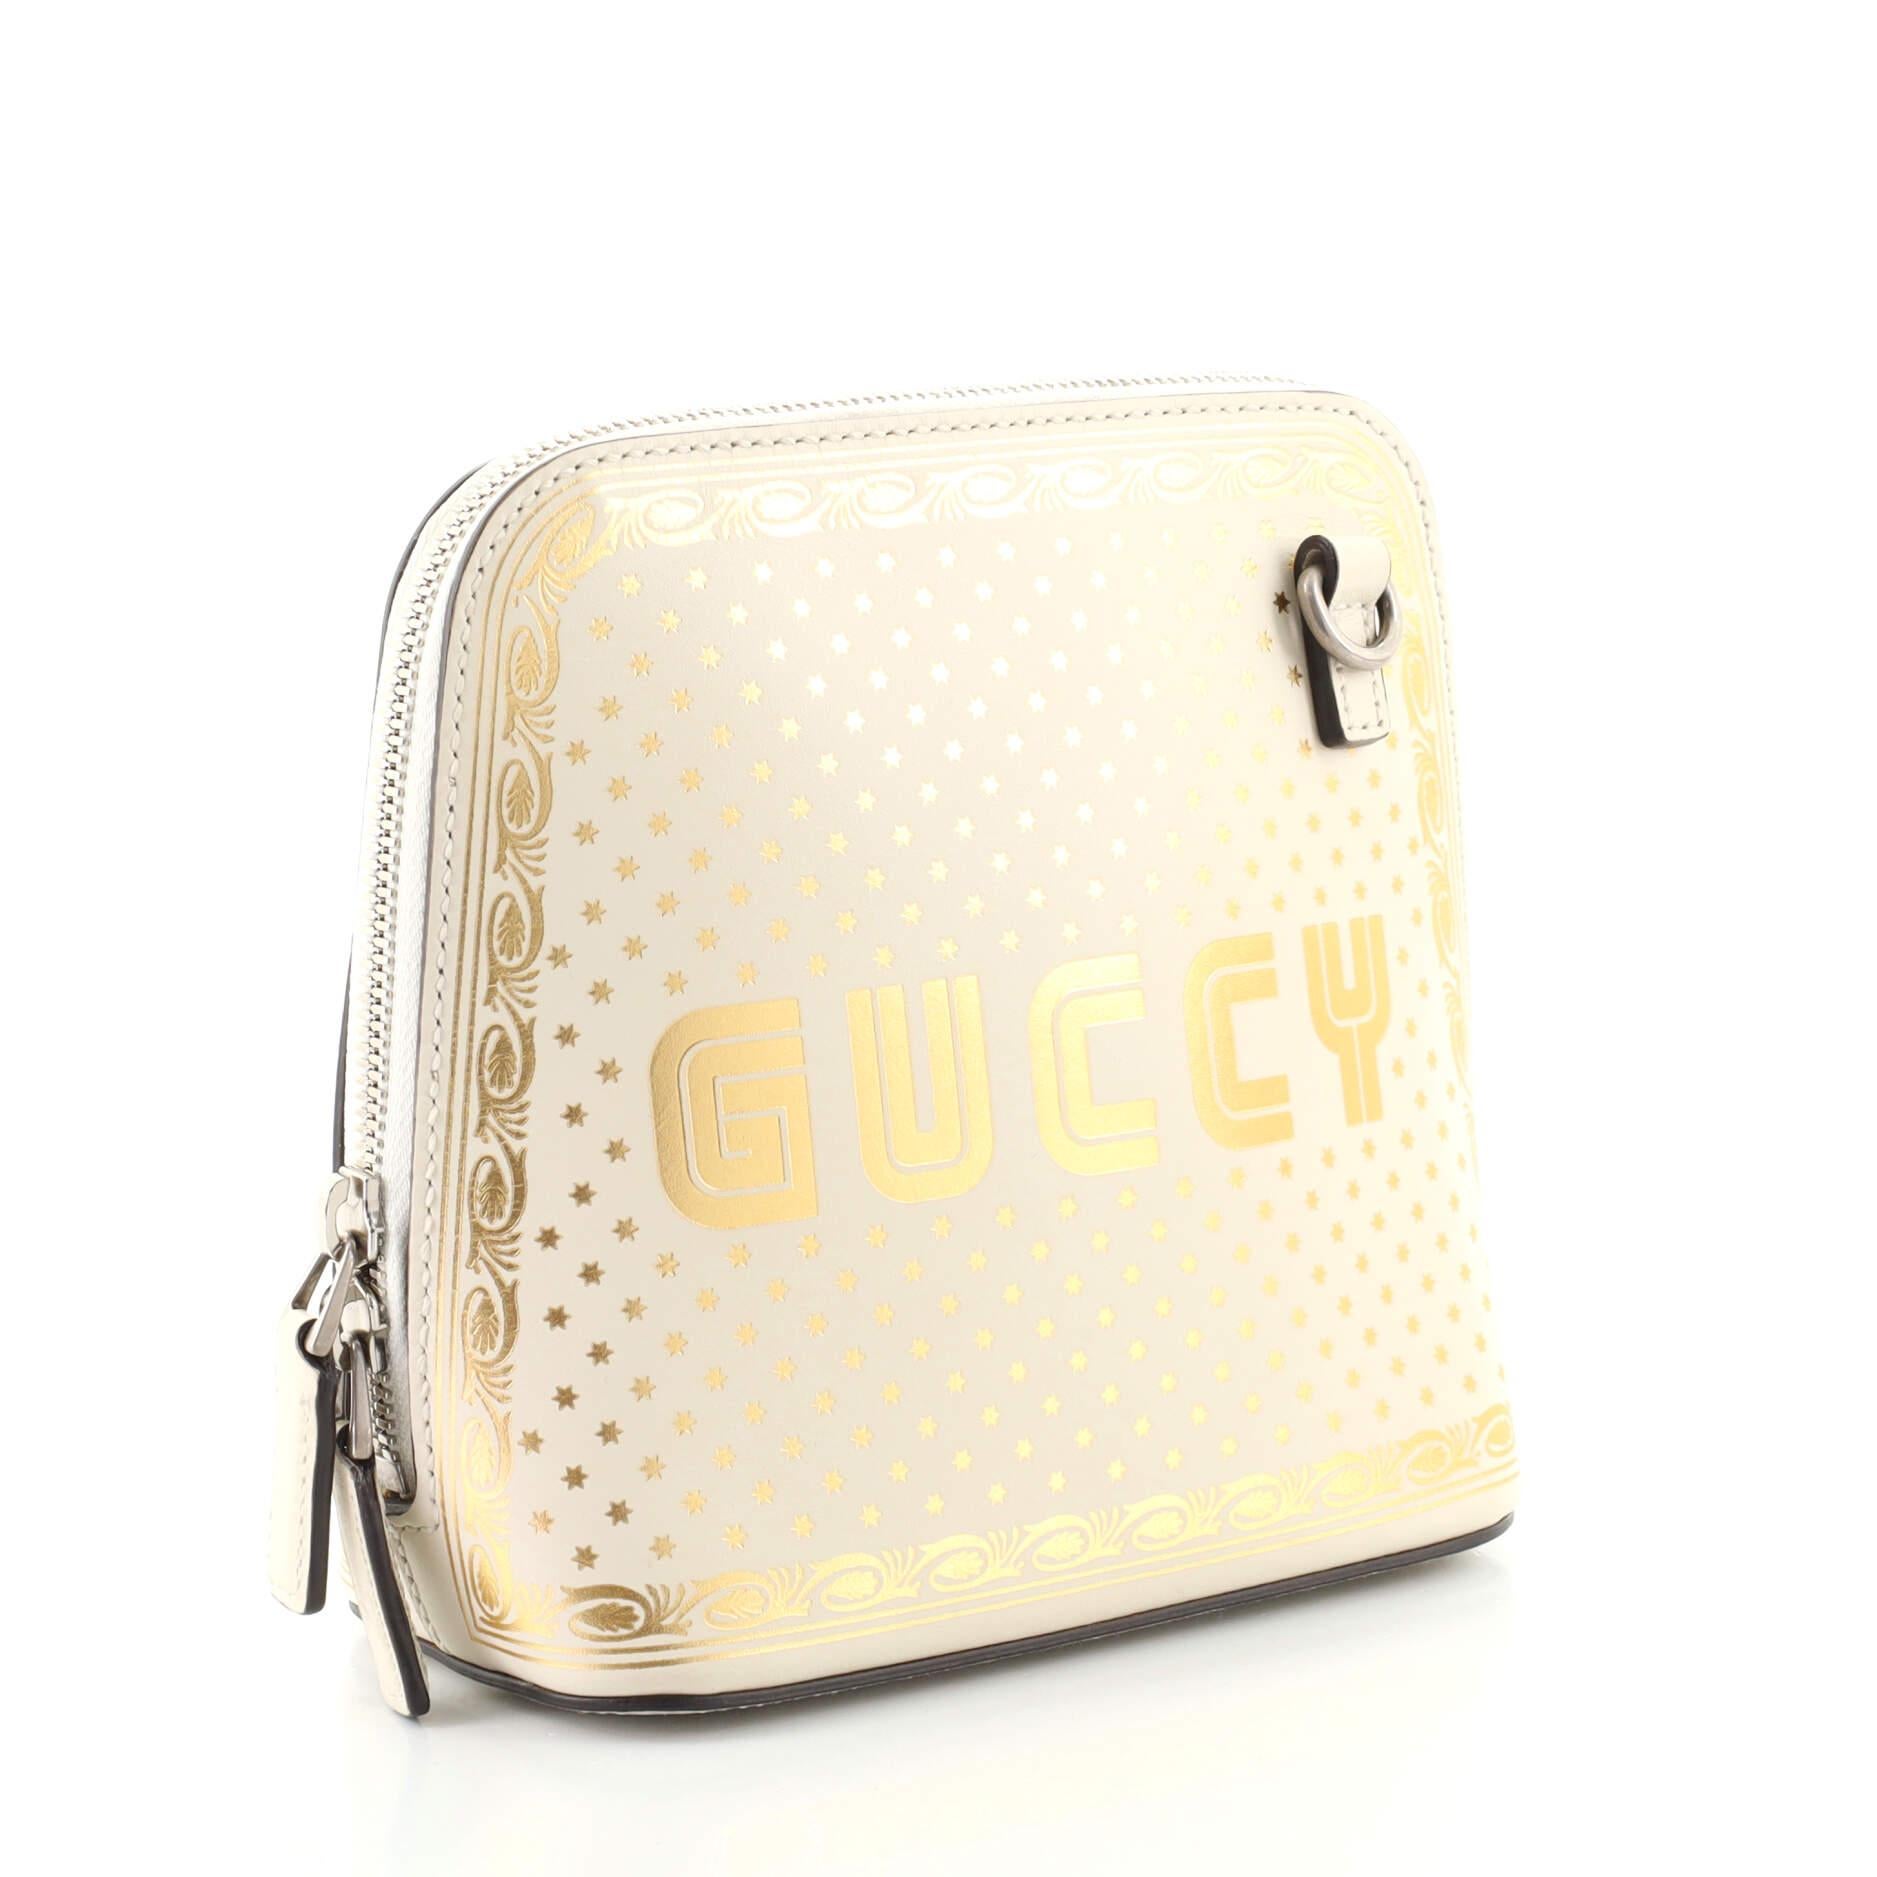 White Gucci Dome Crossbody Bag Limited Edition Printed Leather Mini